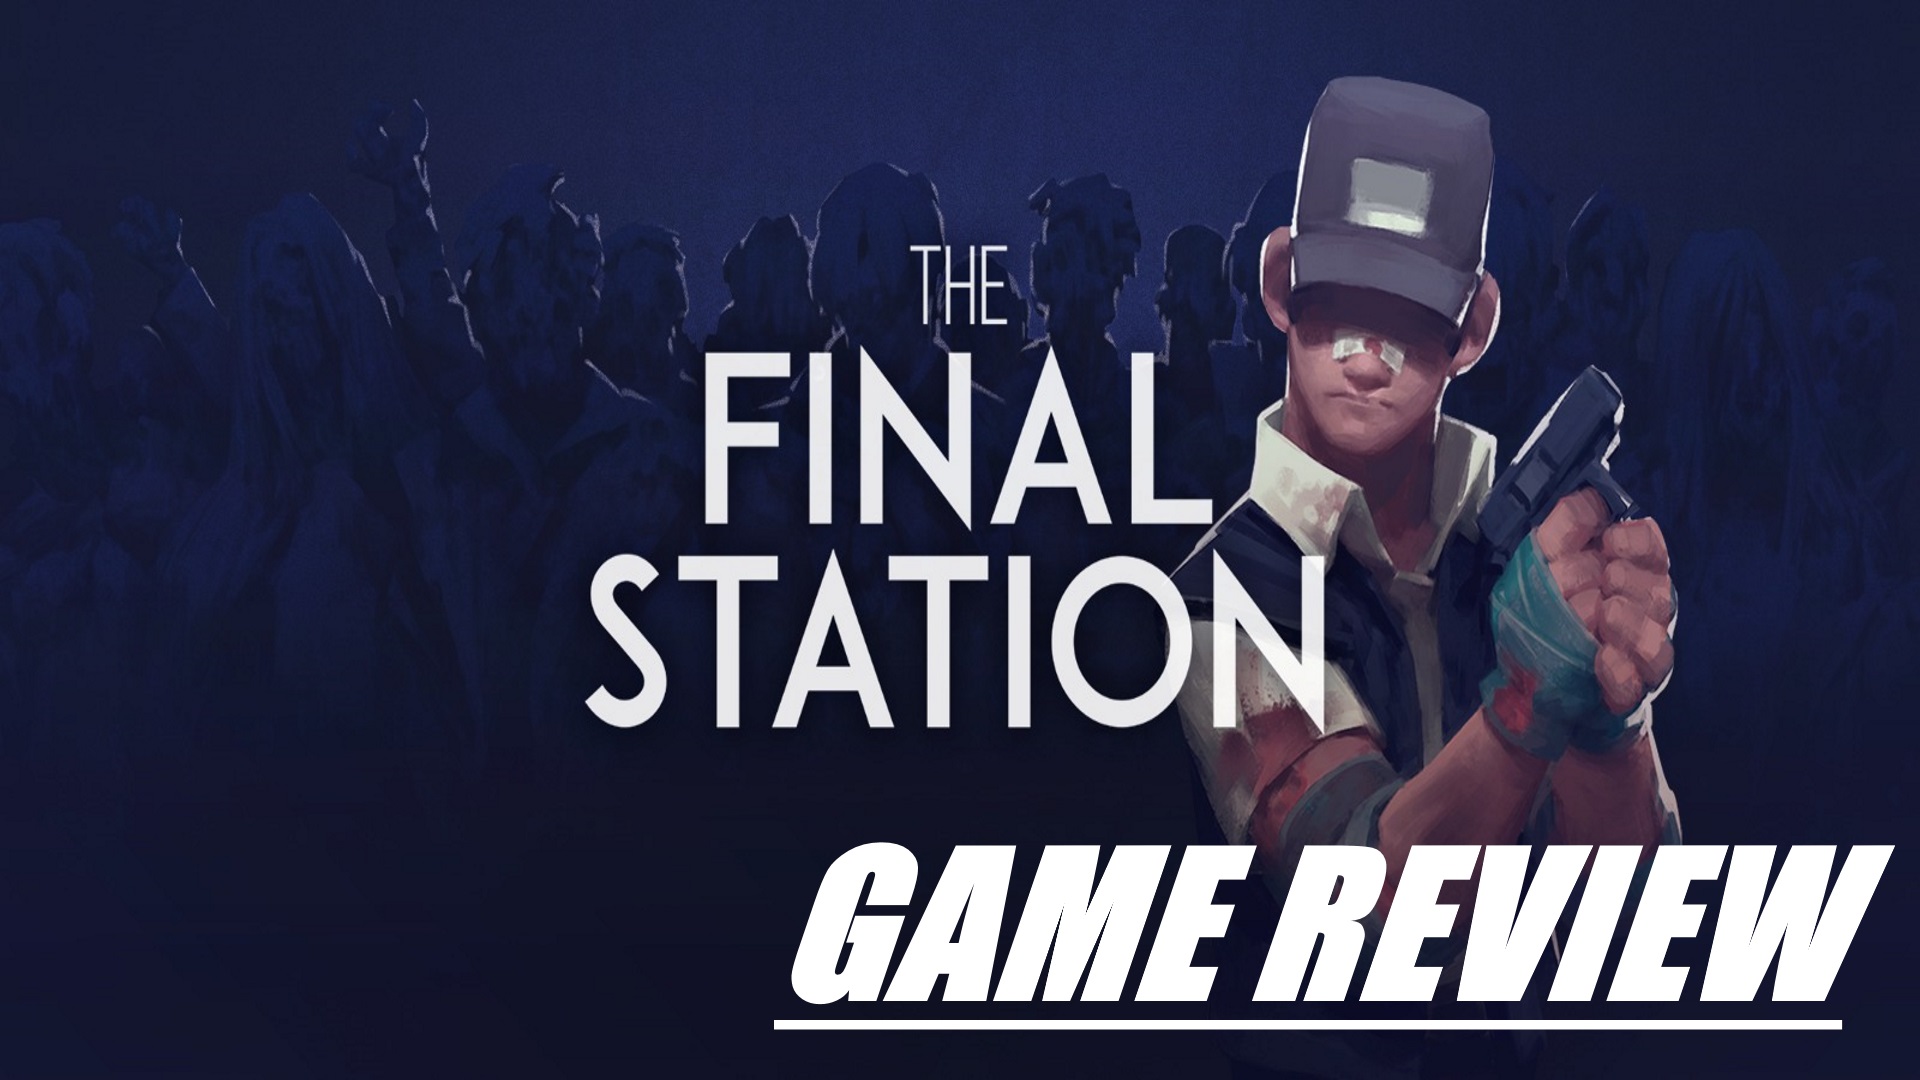 Final Station Game Review.jpg